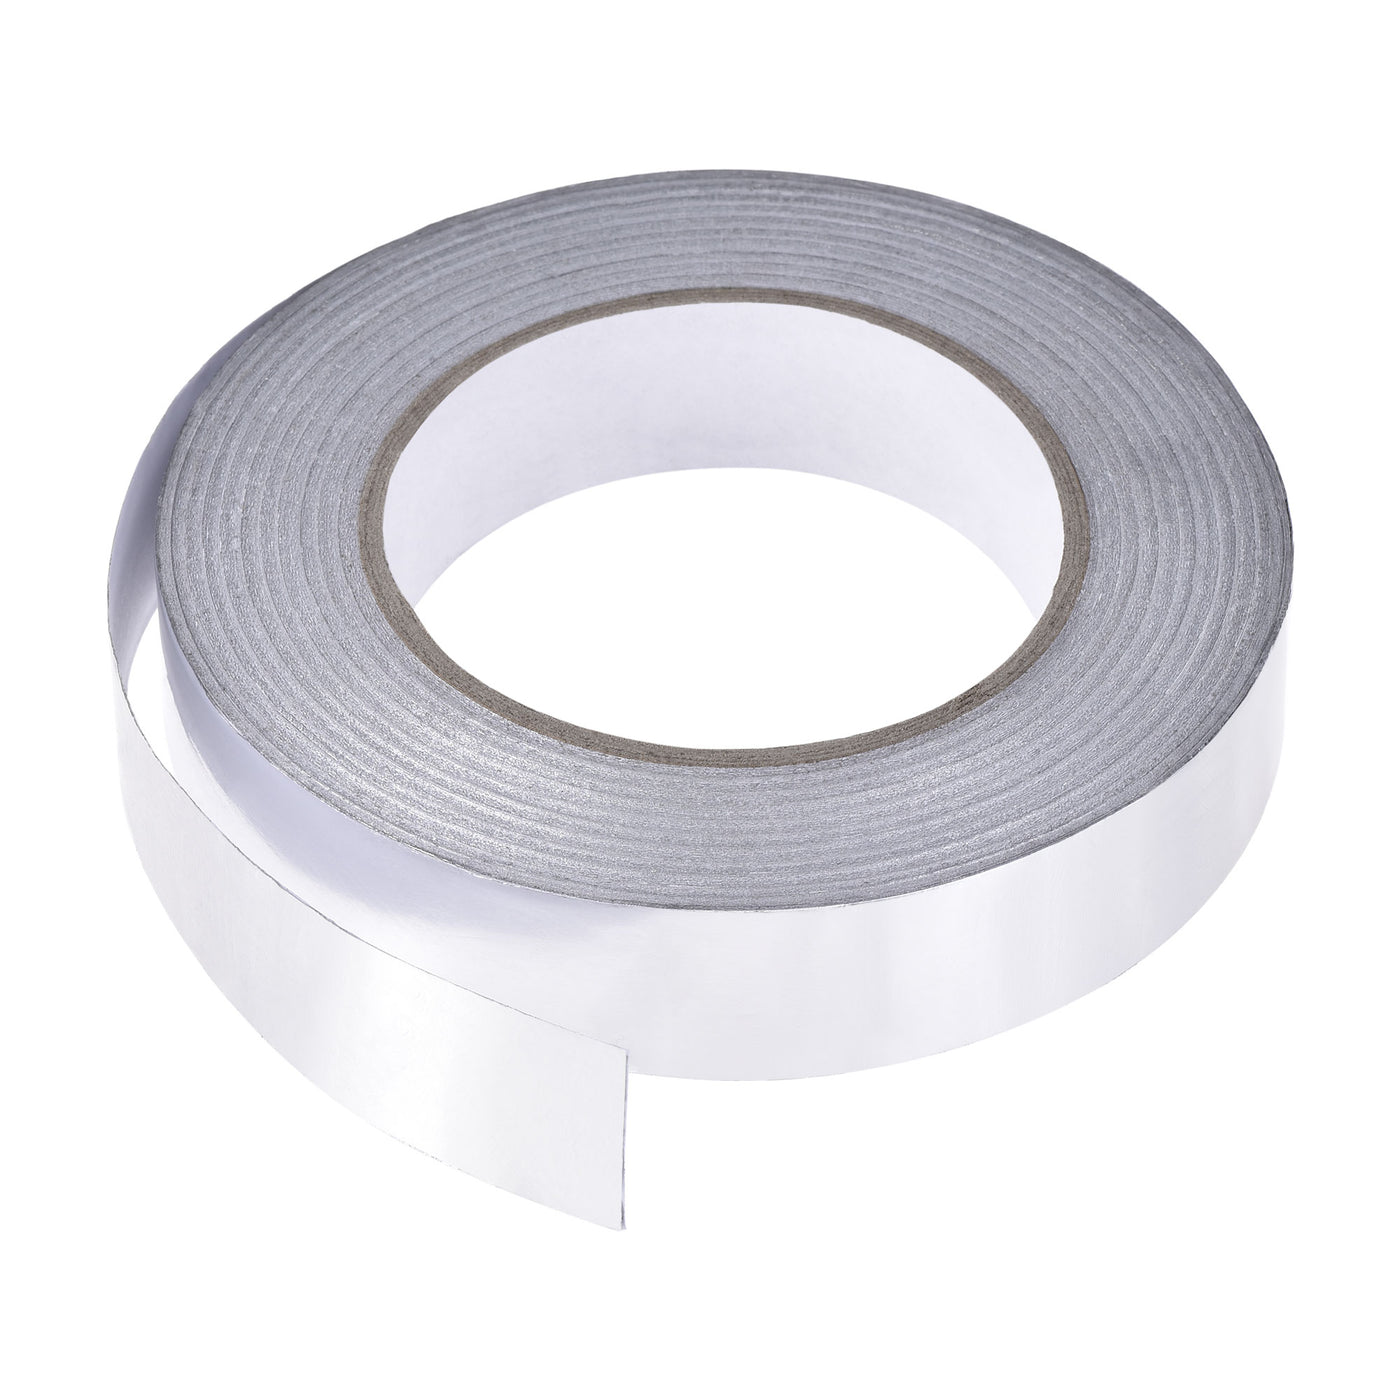 uxcell Uxcell Aluminum Foil Tape, 25mmx50m Self-adhesive Waterproof High Temperature Sealing Tapes for HVAC Duct Pipe Insulation